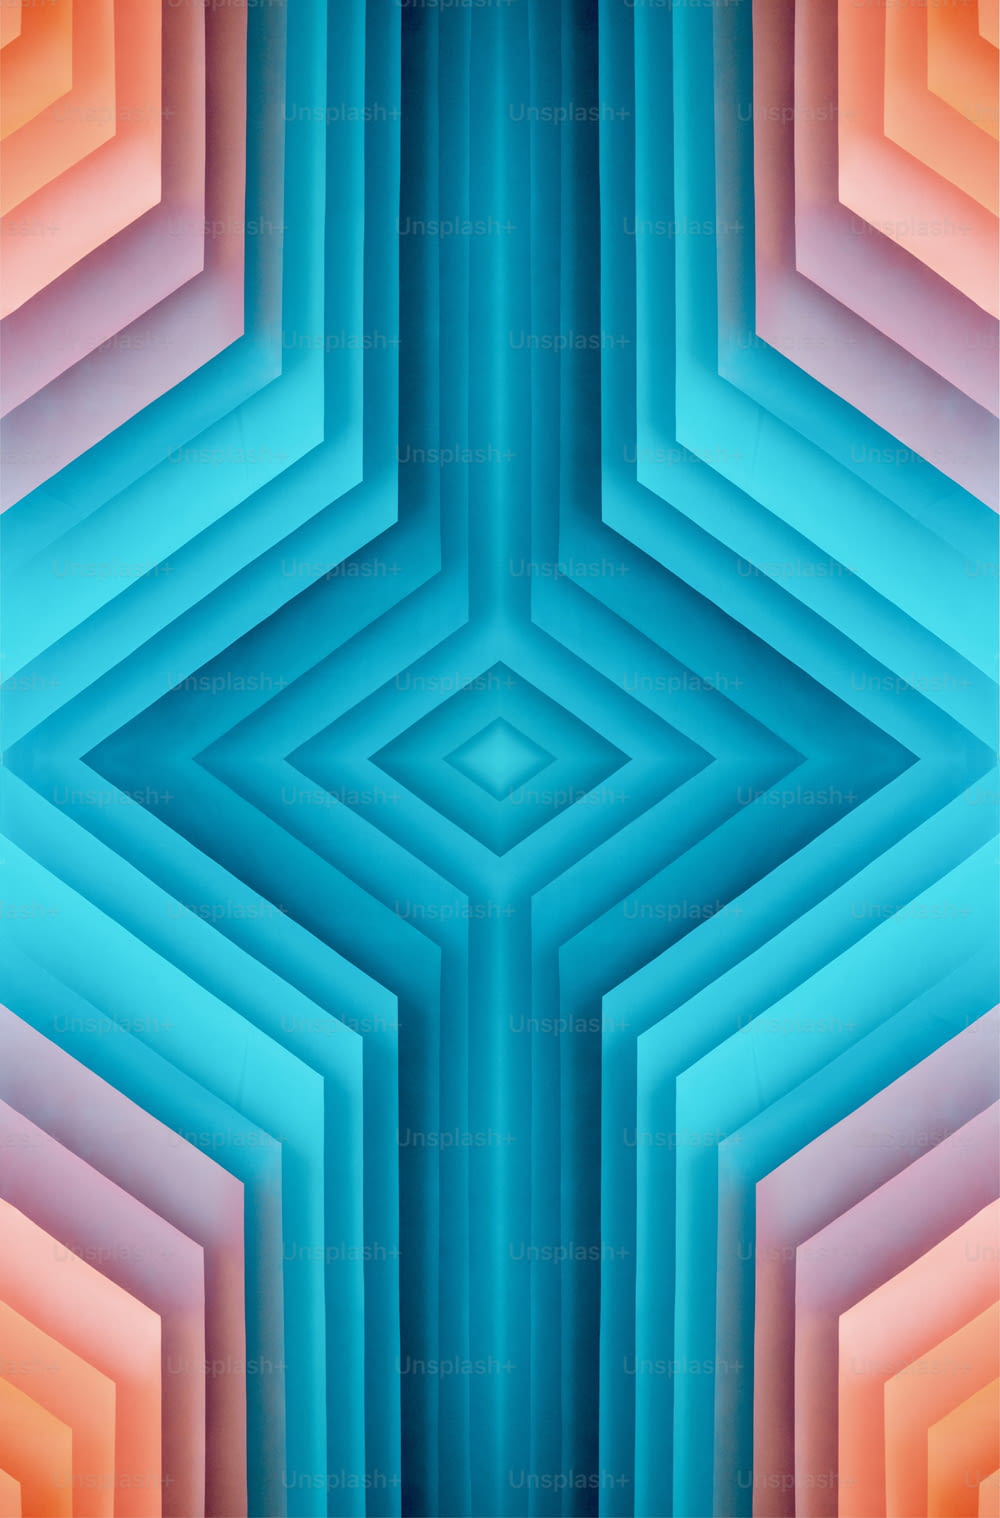 an abstract image of a blue, orange, and pink pattern